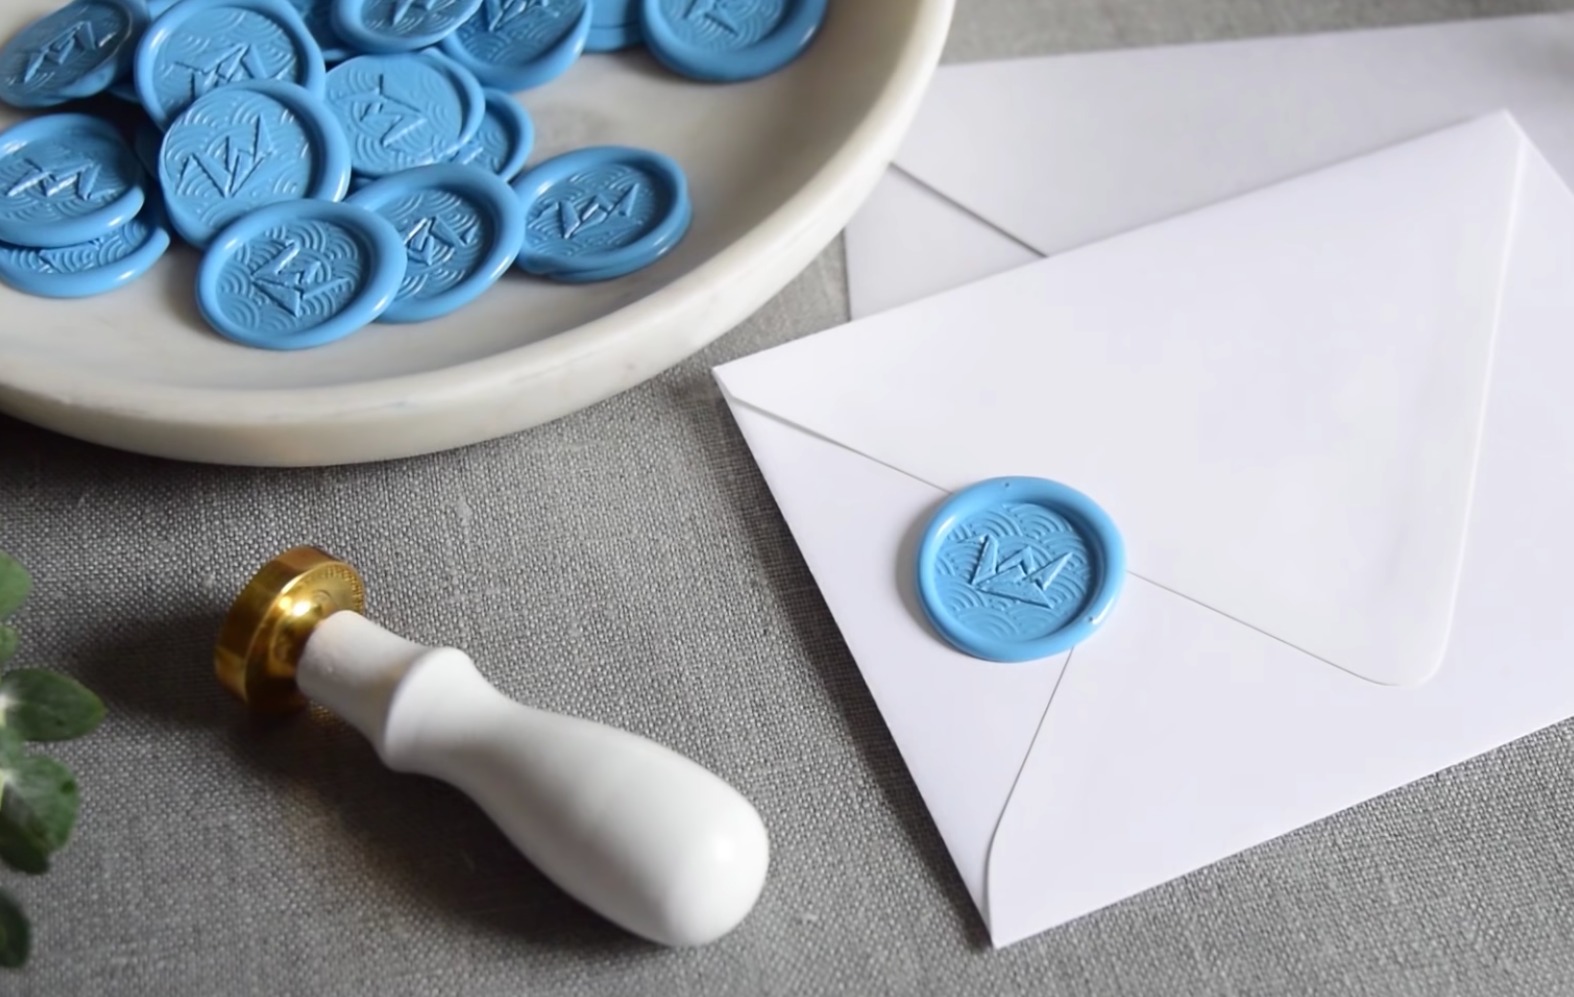 HOW TO USE A WAX SEAL STAMP WITH A GLUE GUN – Heirloom Seals